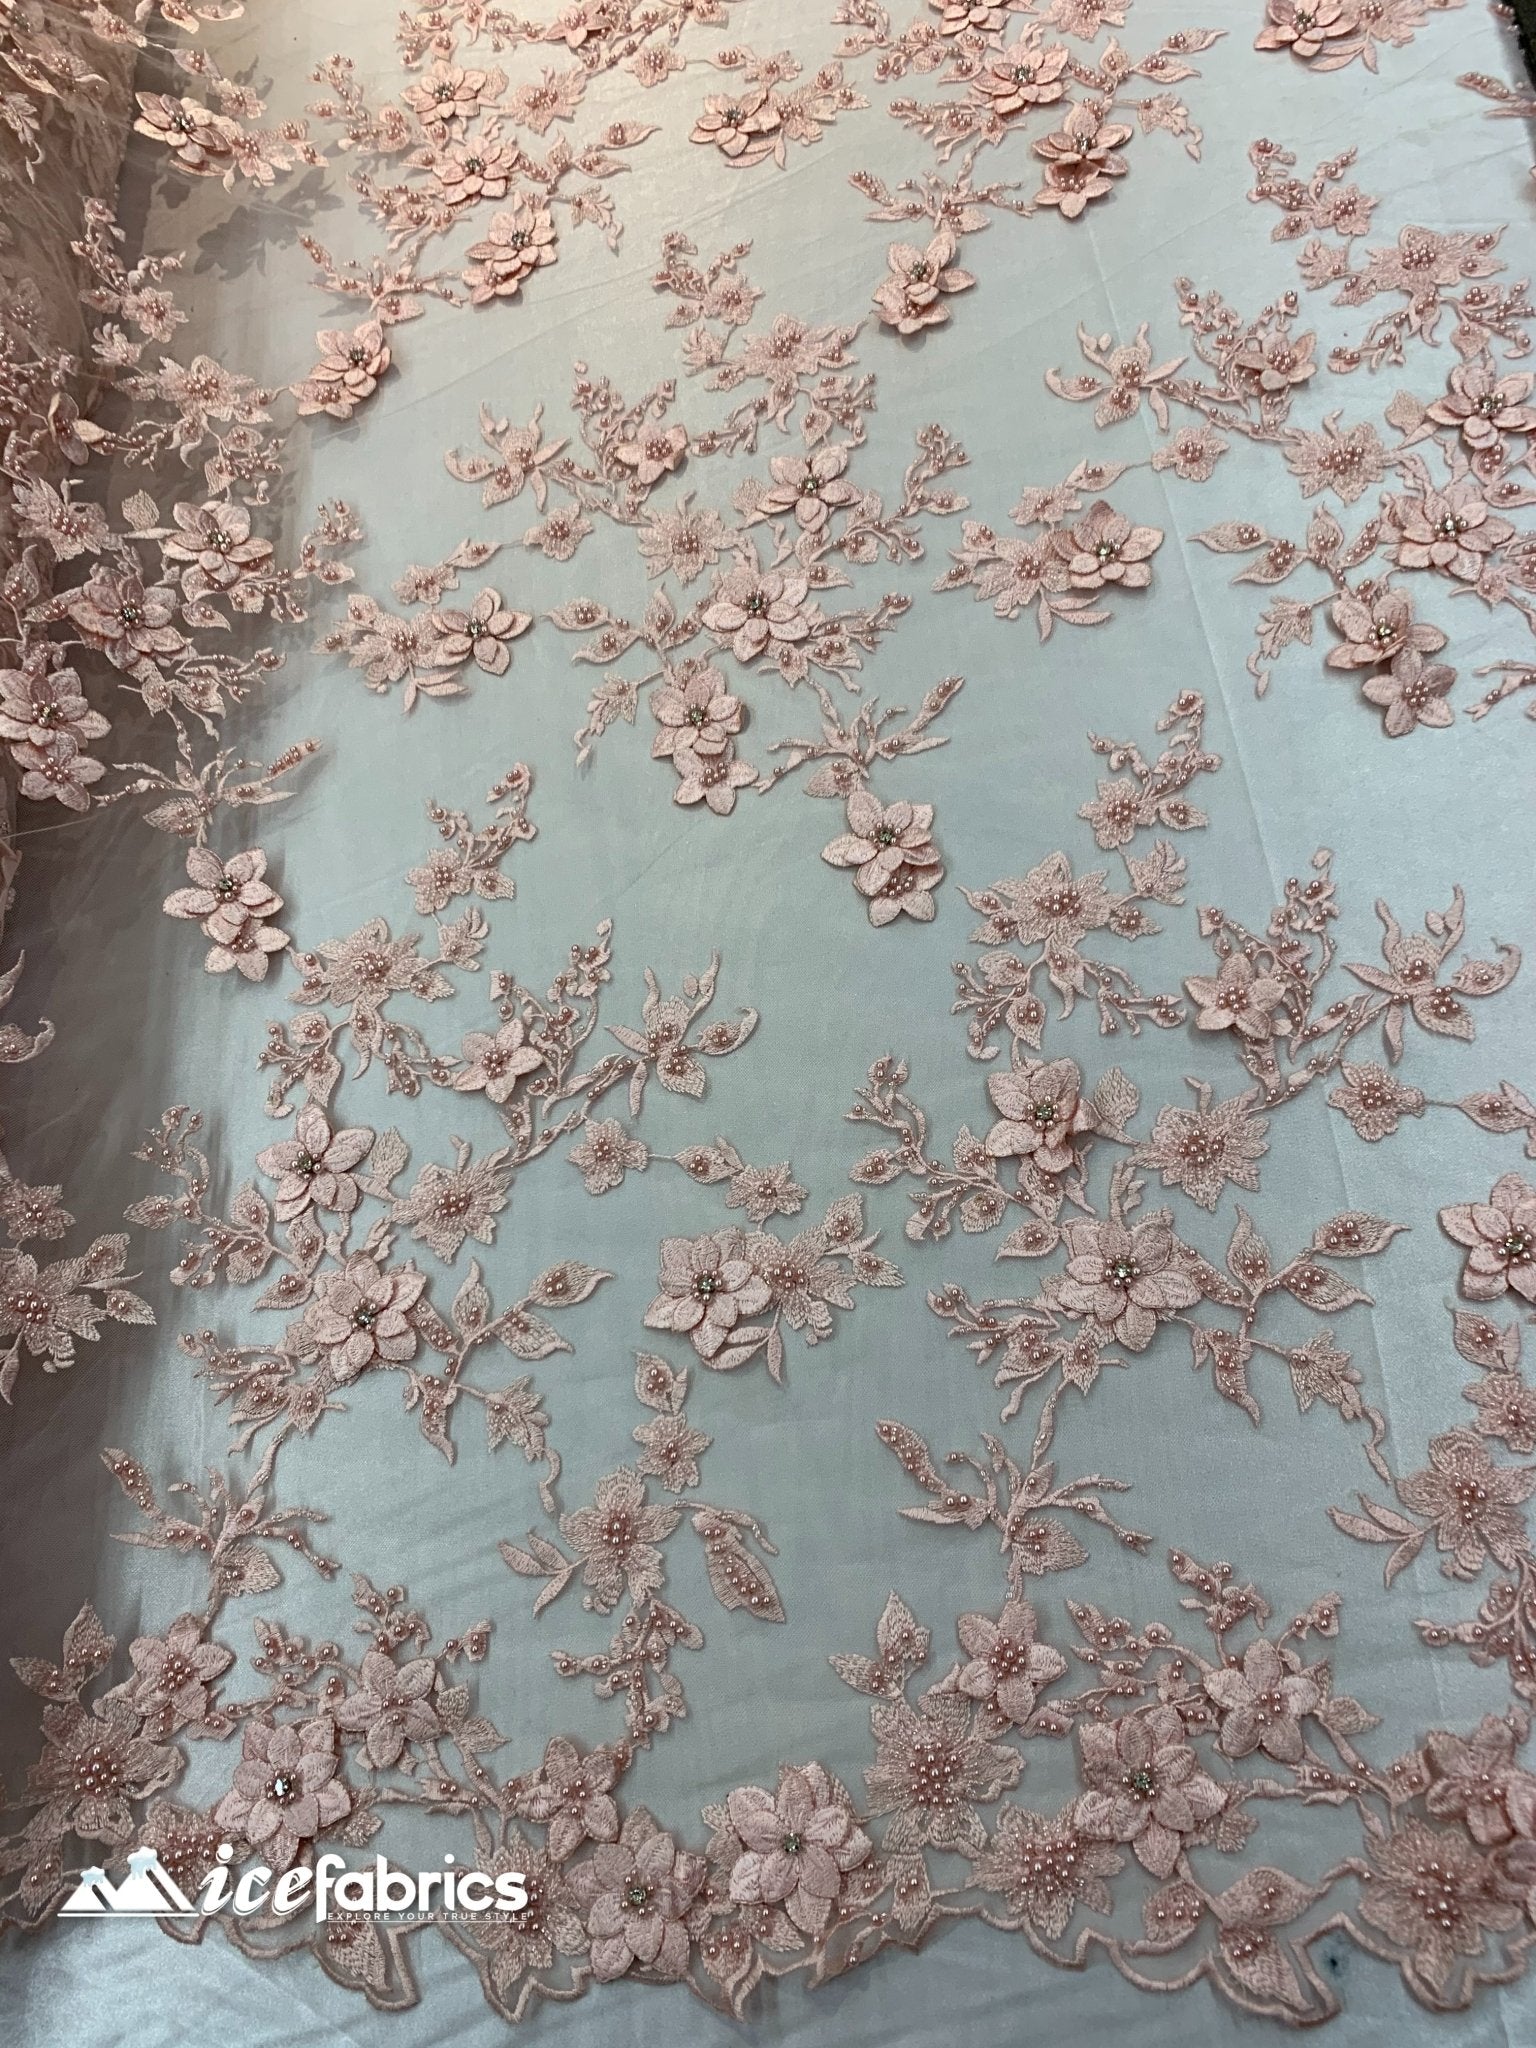 Flowers Embroidered Beaded Fabric/ Mesh Lace Fabric/ Bridal Fabric/ICE FABRICSICE FABRICSPinkFlowers Embroidered Beaded Fabric/ Mesh Lace Fabric/ Bridal Fabric/ ICE FABRICS Pink